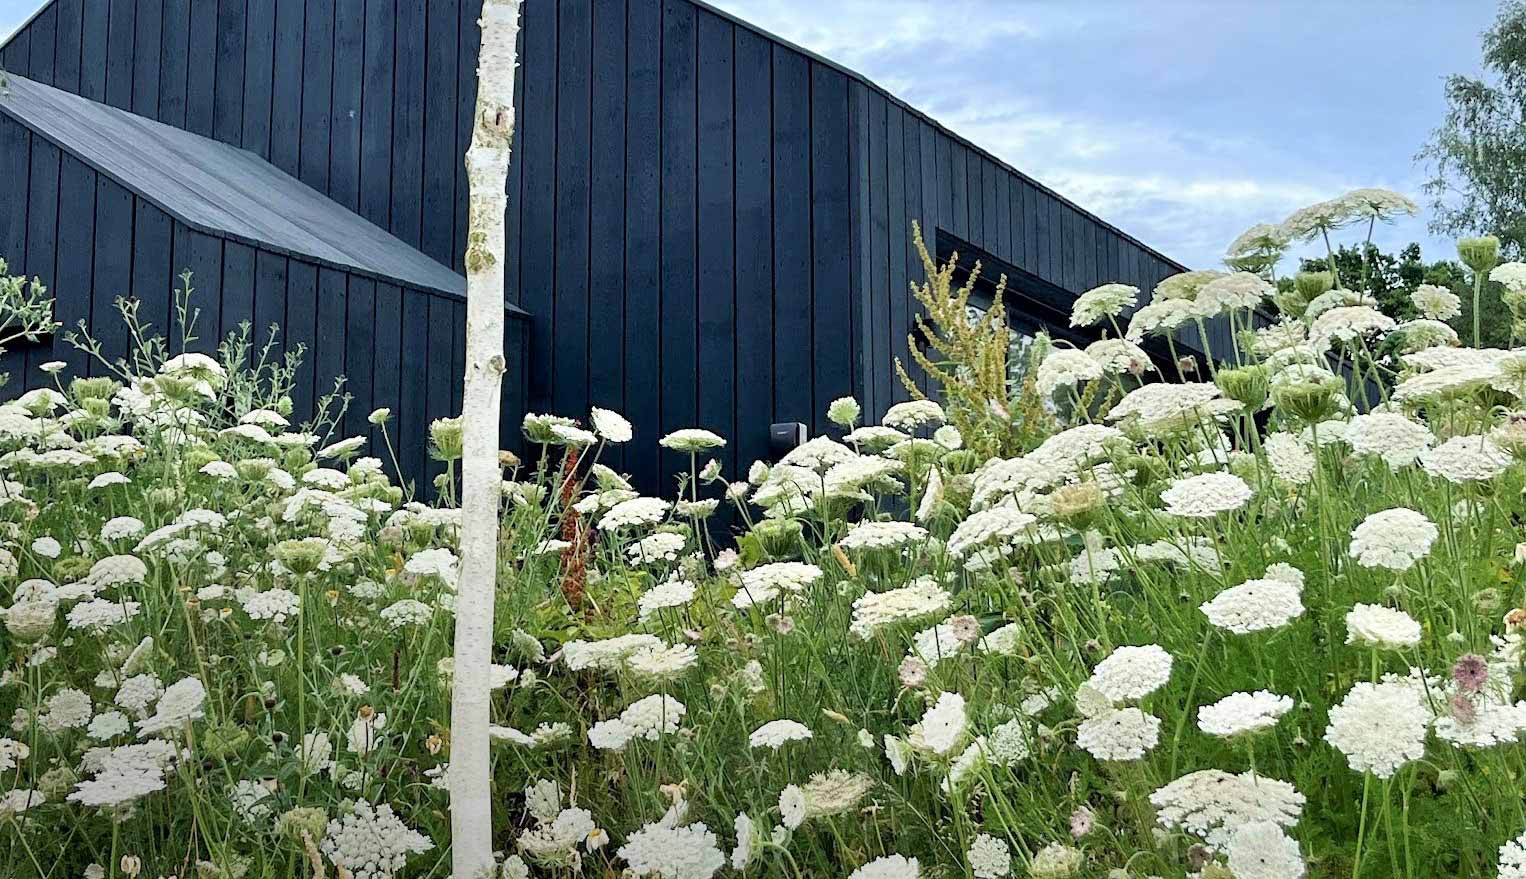 Sustainable meadow planting against a black timber barn